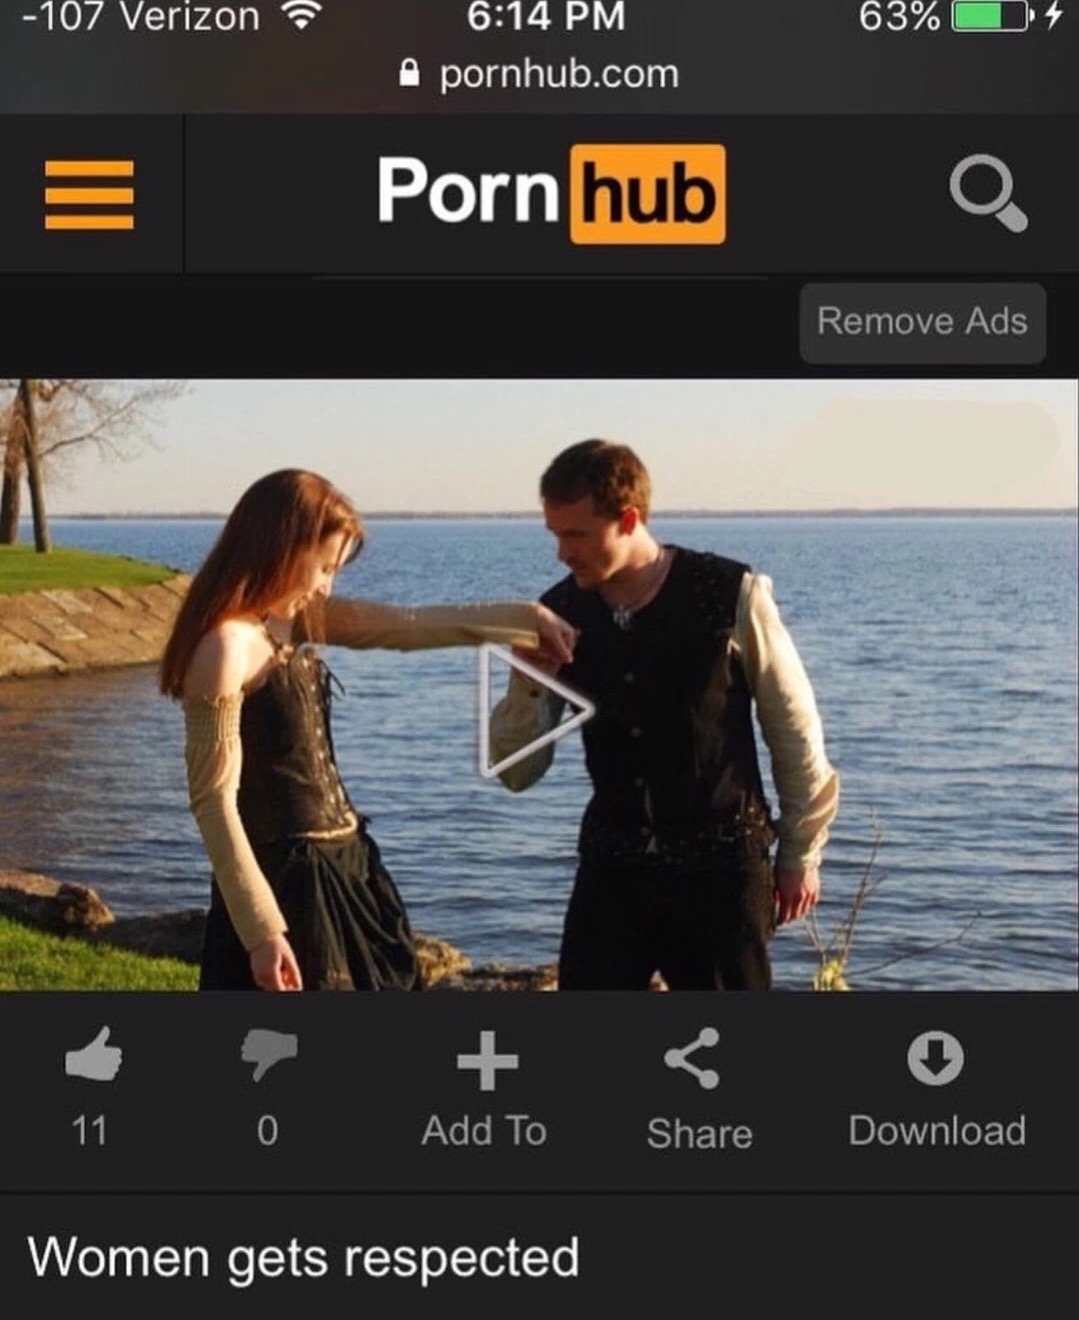 Pornhub showing a video of a girl betting respected.